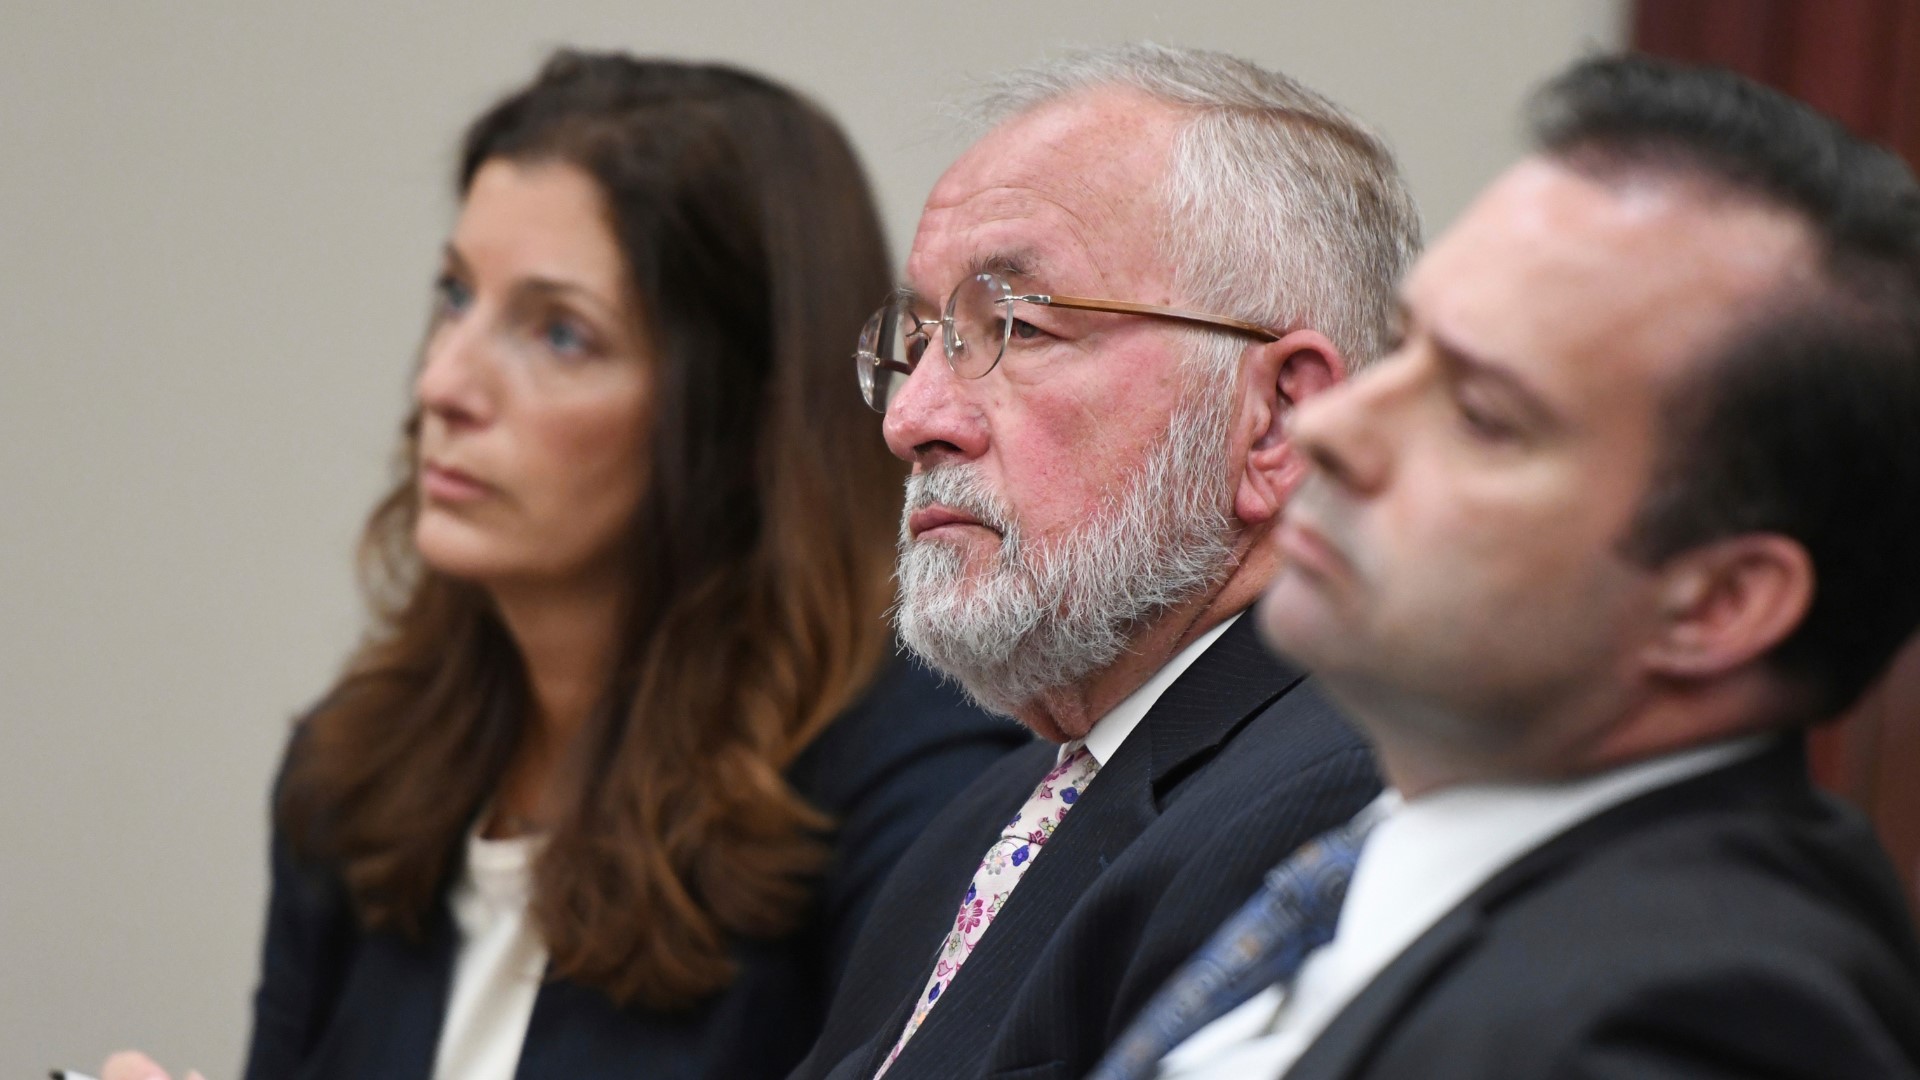 A judge has ordered former Michigan State University dean William Strampel, who had oversight of now-imprisoned sports doctor Larry Nassar, to serve up to a year in jail. He was acquitted of the more serious criminal sexual conduct charge.